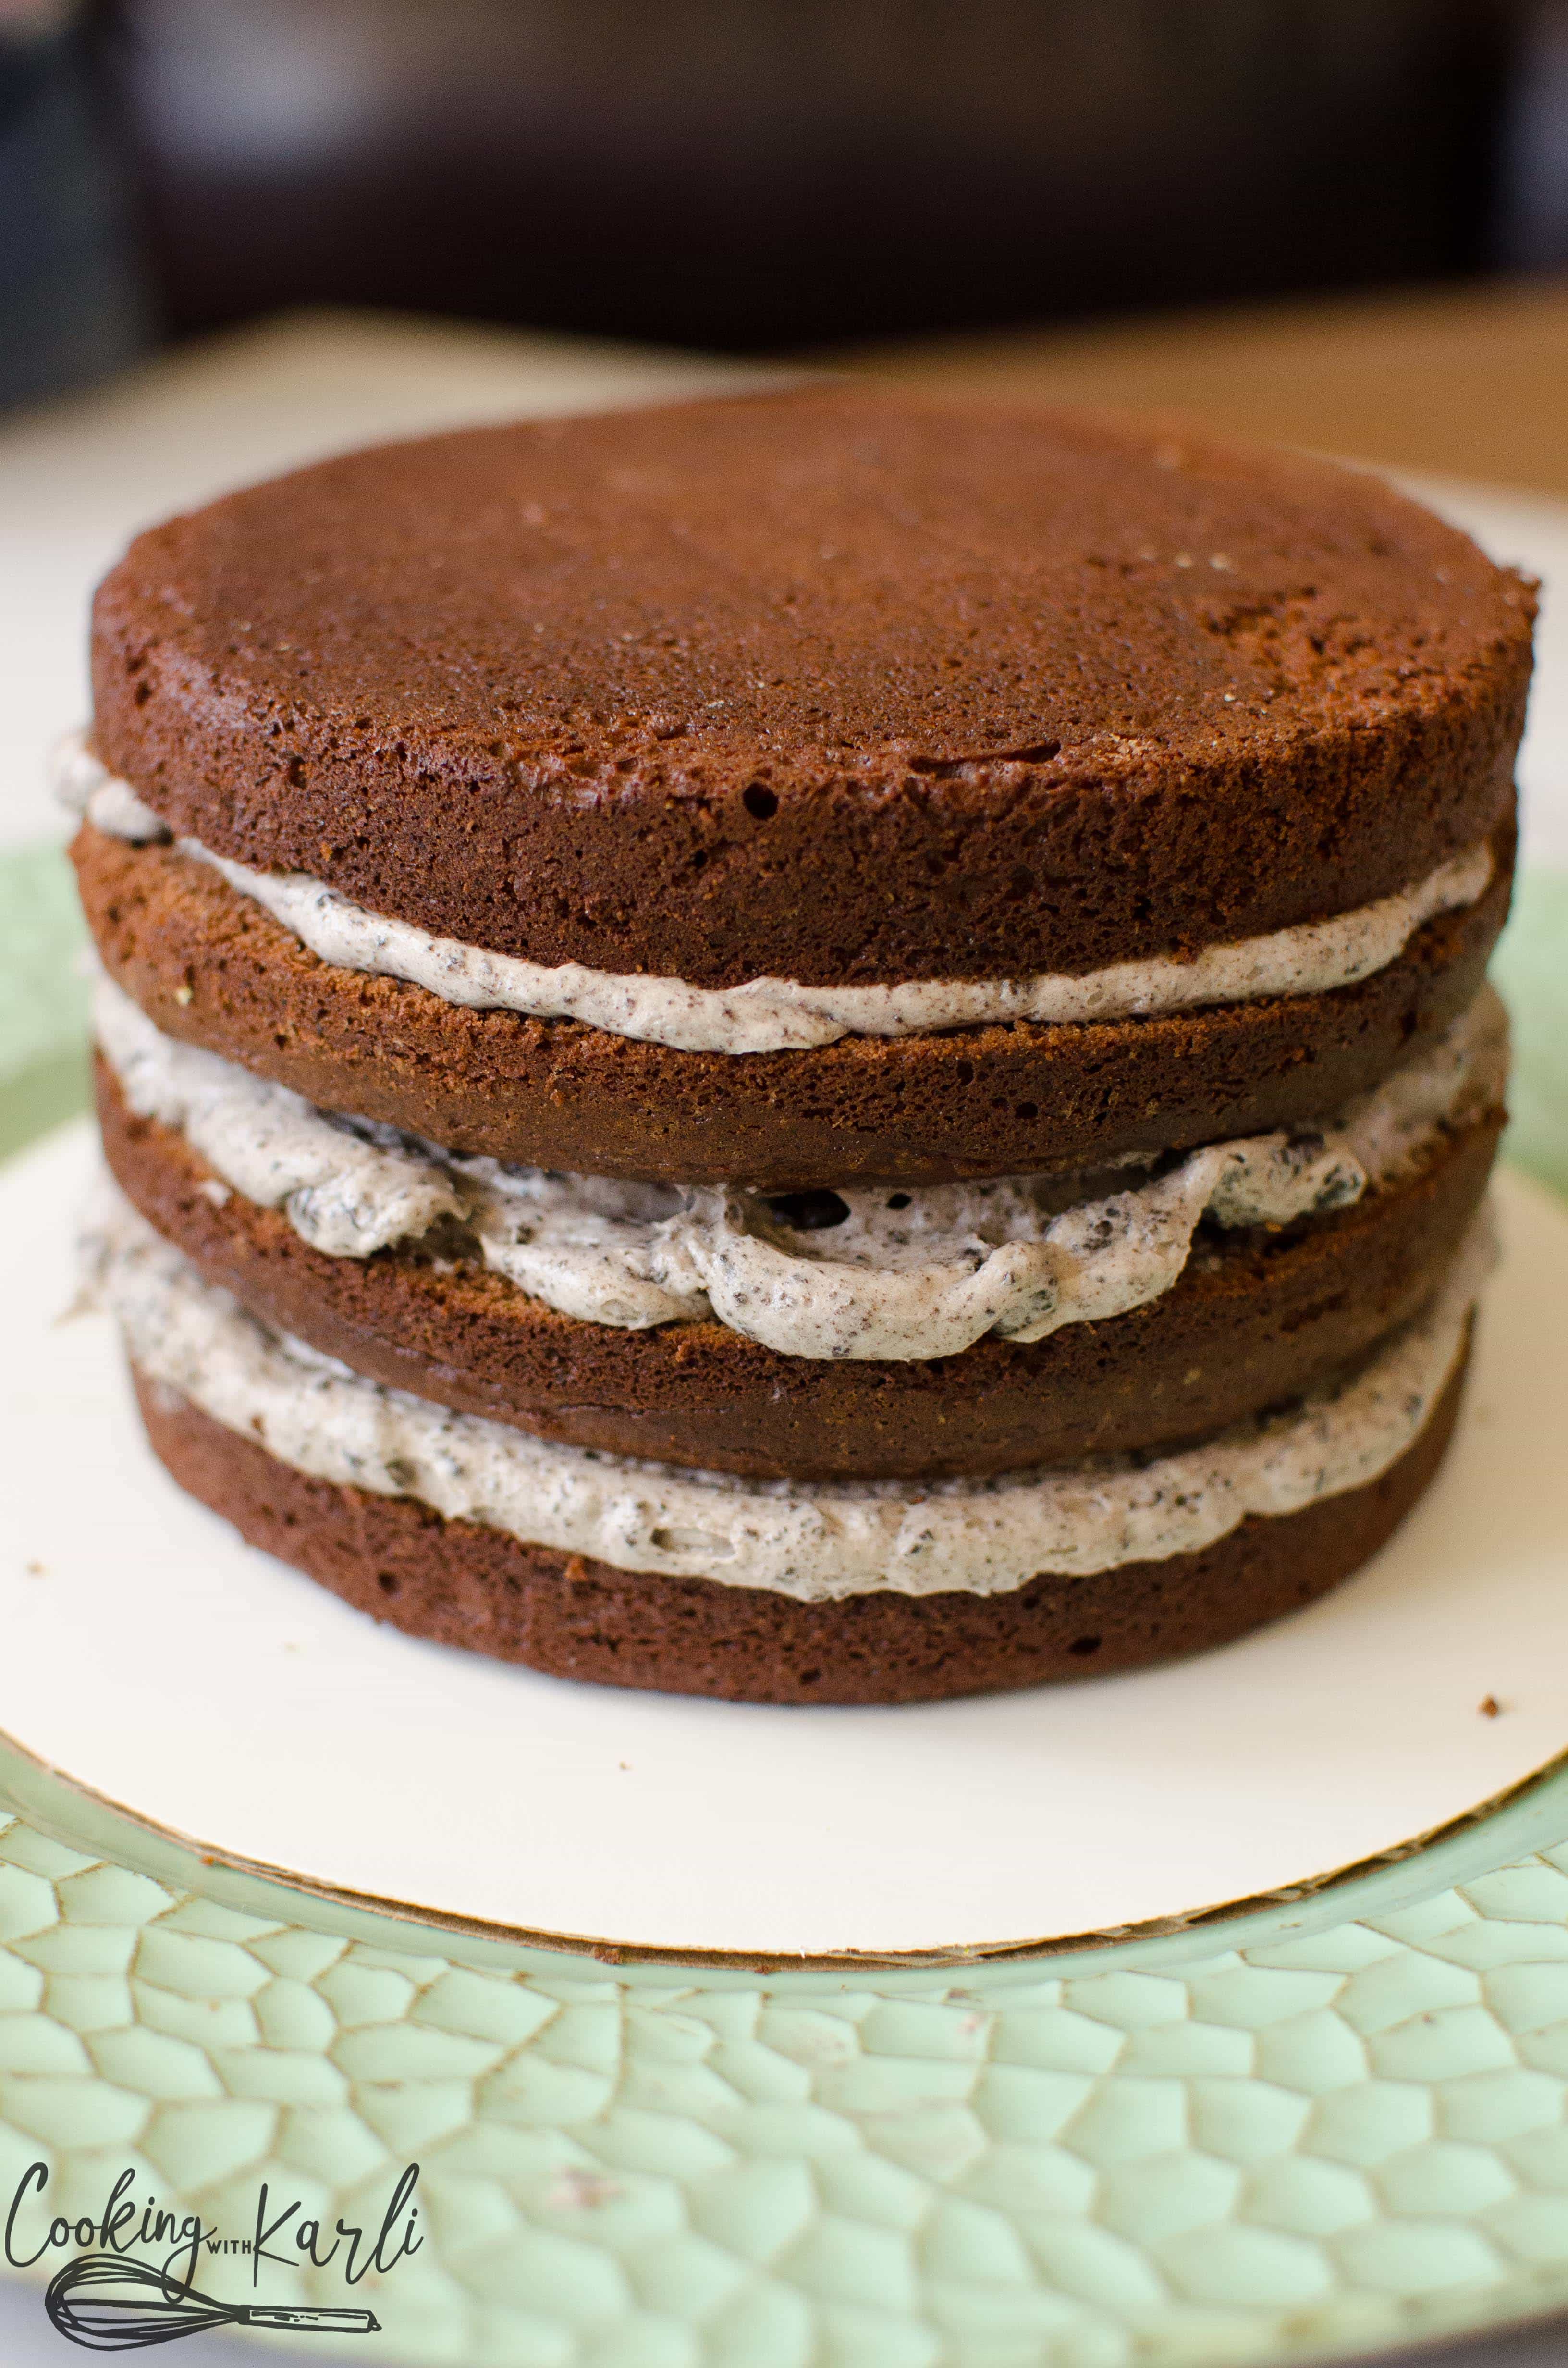 This chocolate cake is perfect for layering and is the base of the Oreo cake.